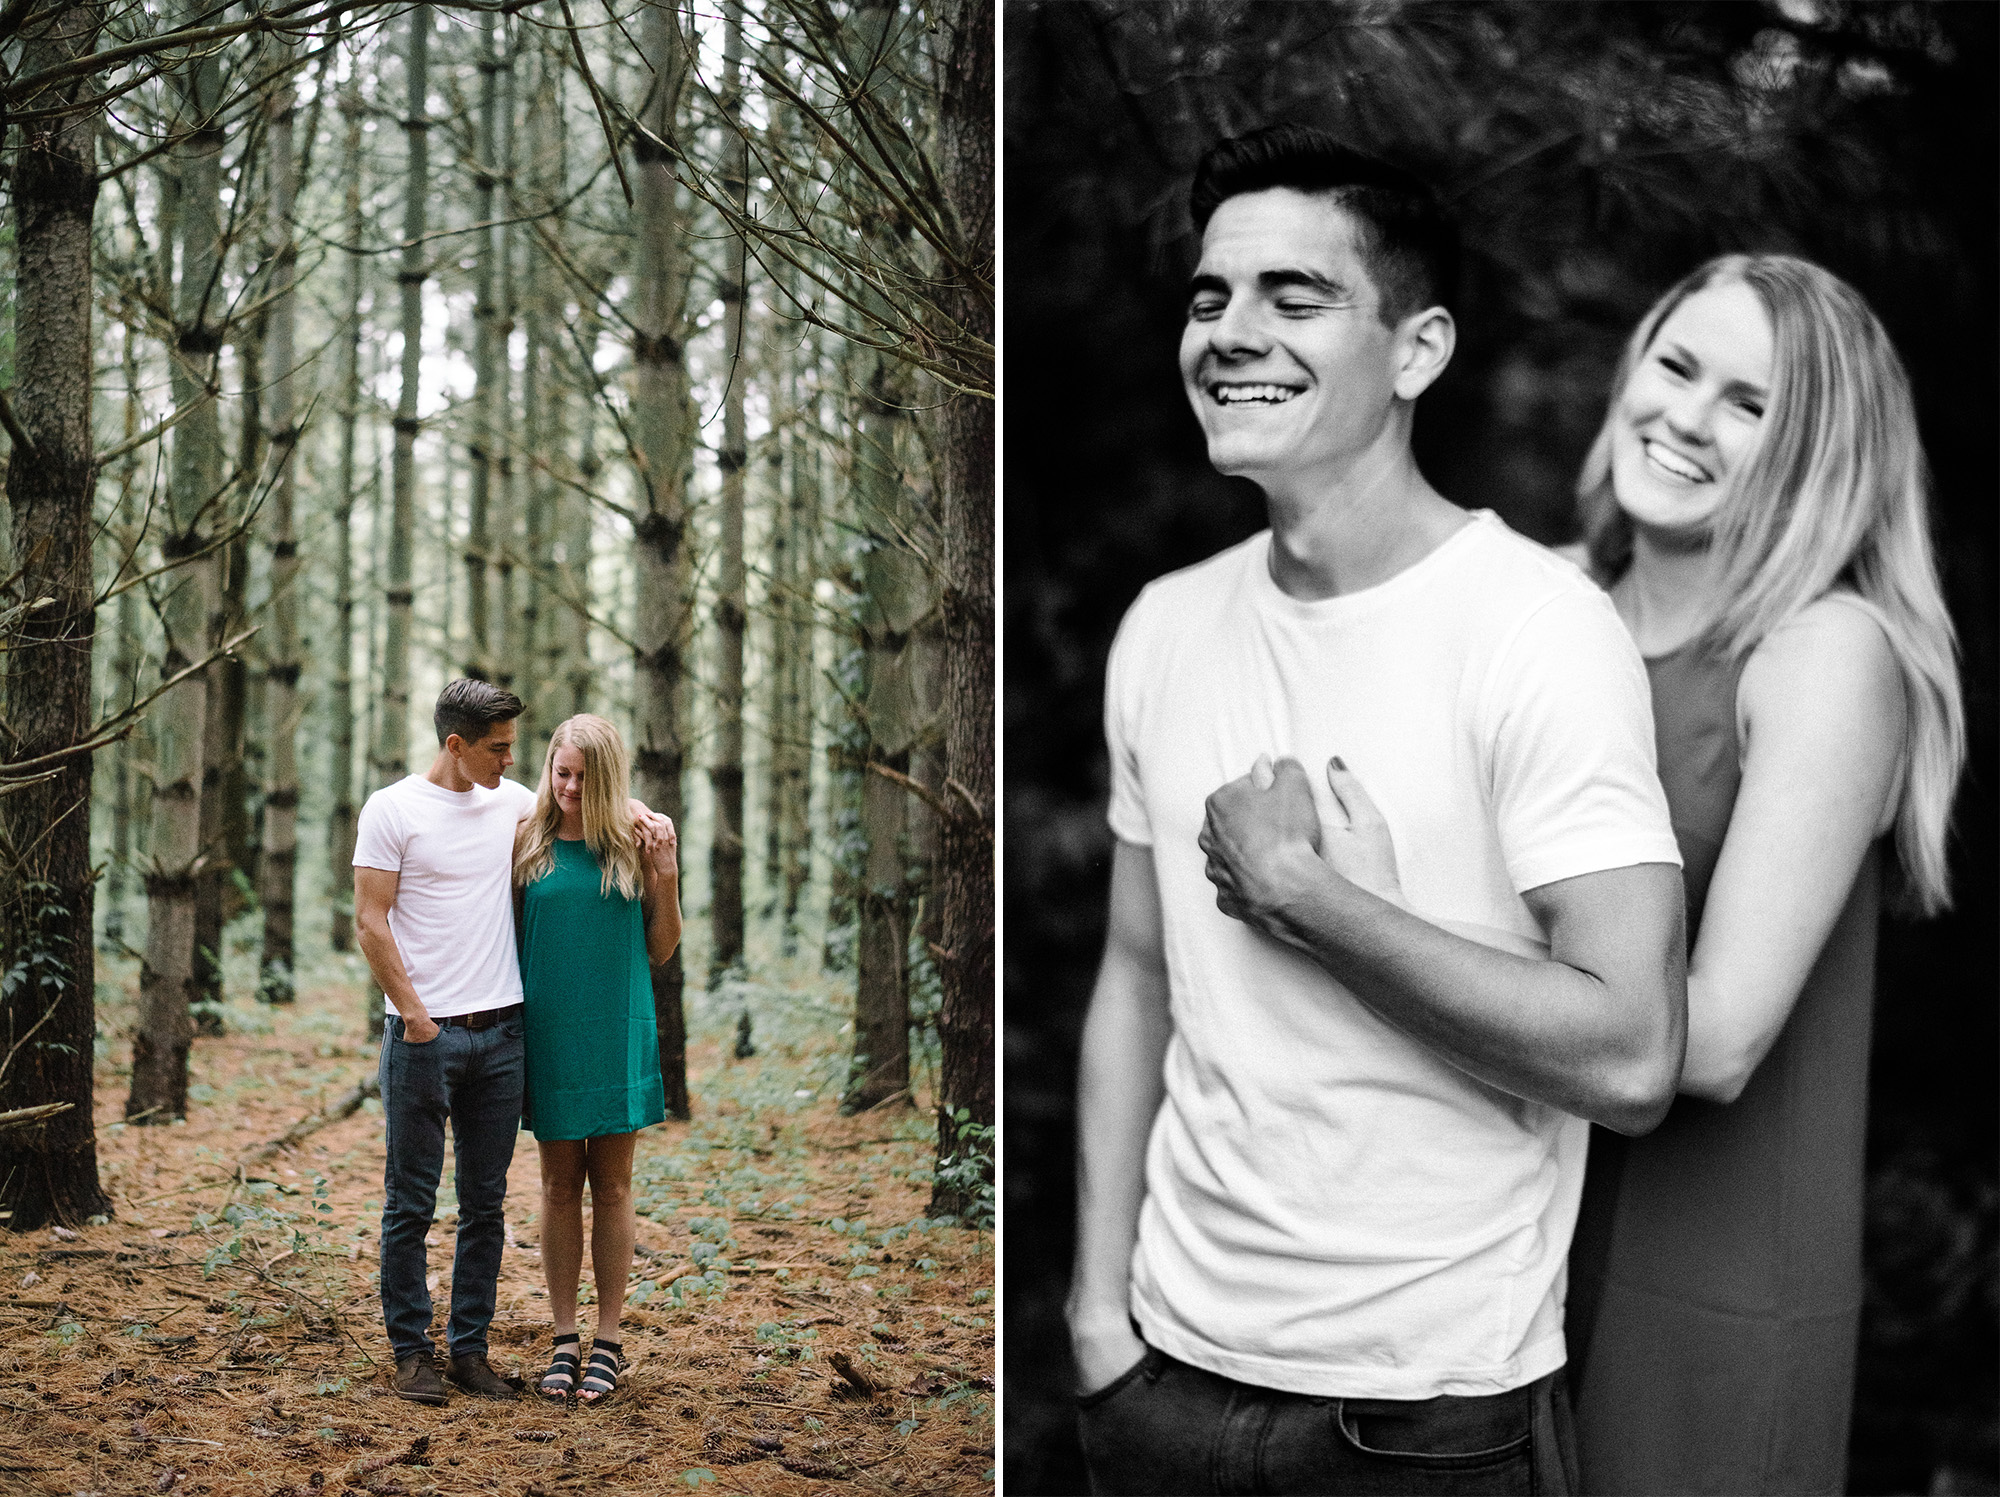 Andrew McClanahan Alex Hilliard Rusty Wright Wooded Woodsy Kansas City Engagement Portraits